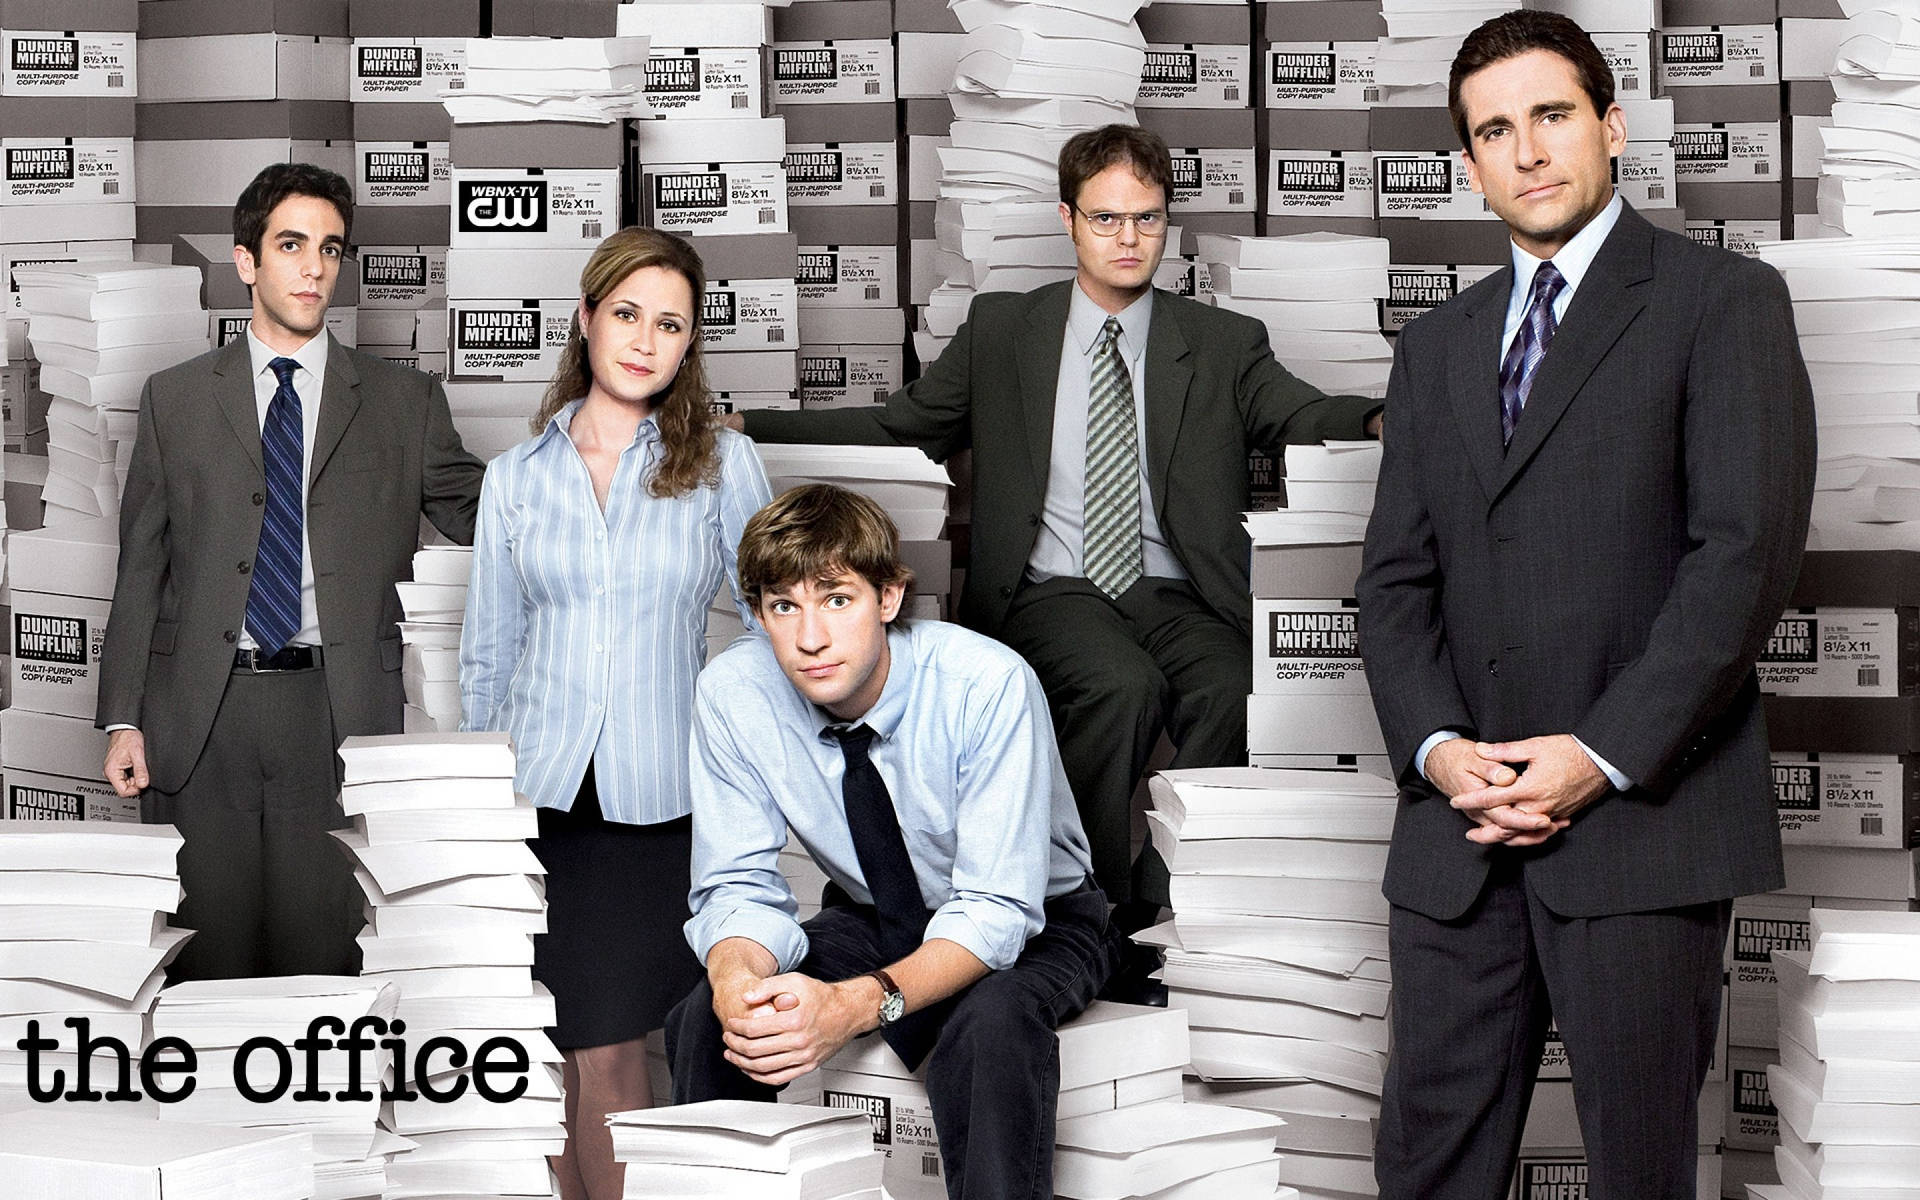 "The Office Cast - A Stack Of Work For Us All!" Wallpaper